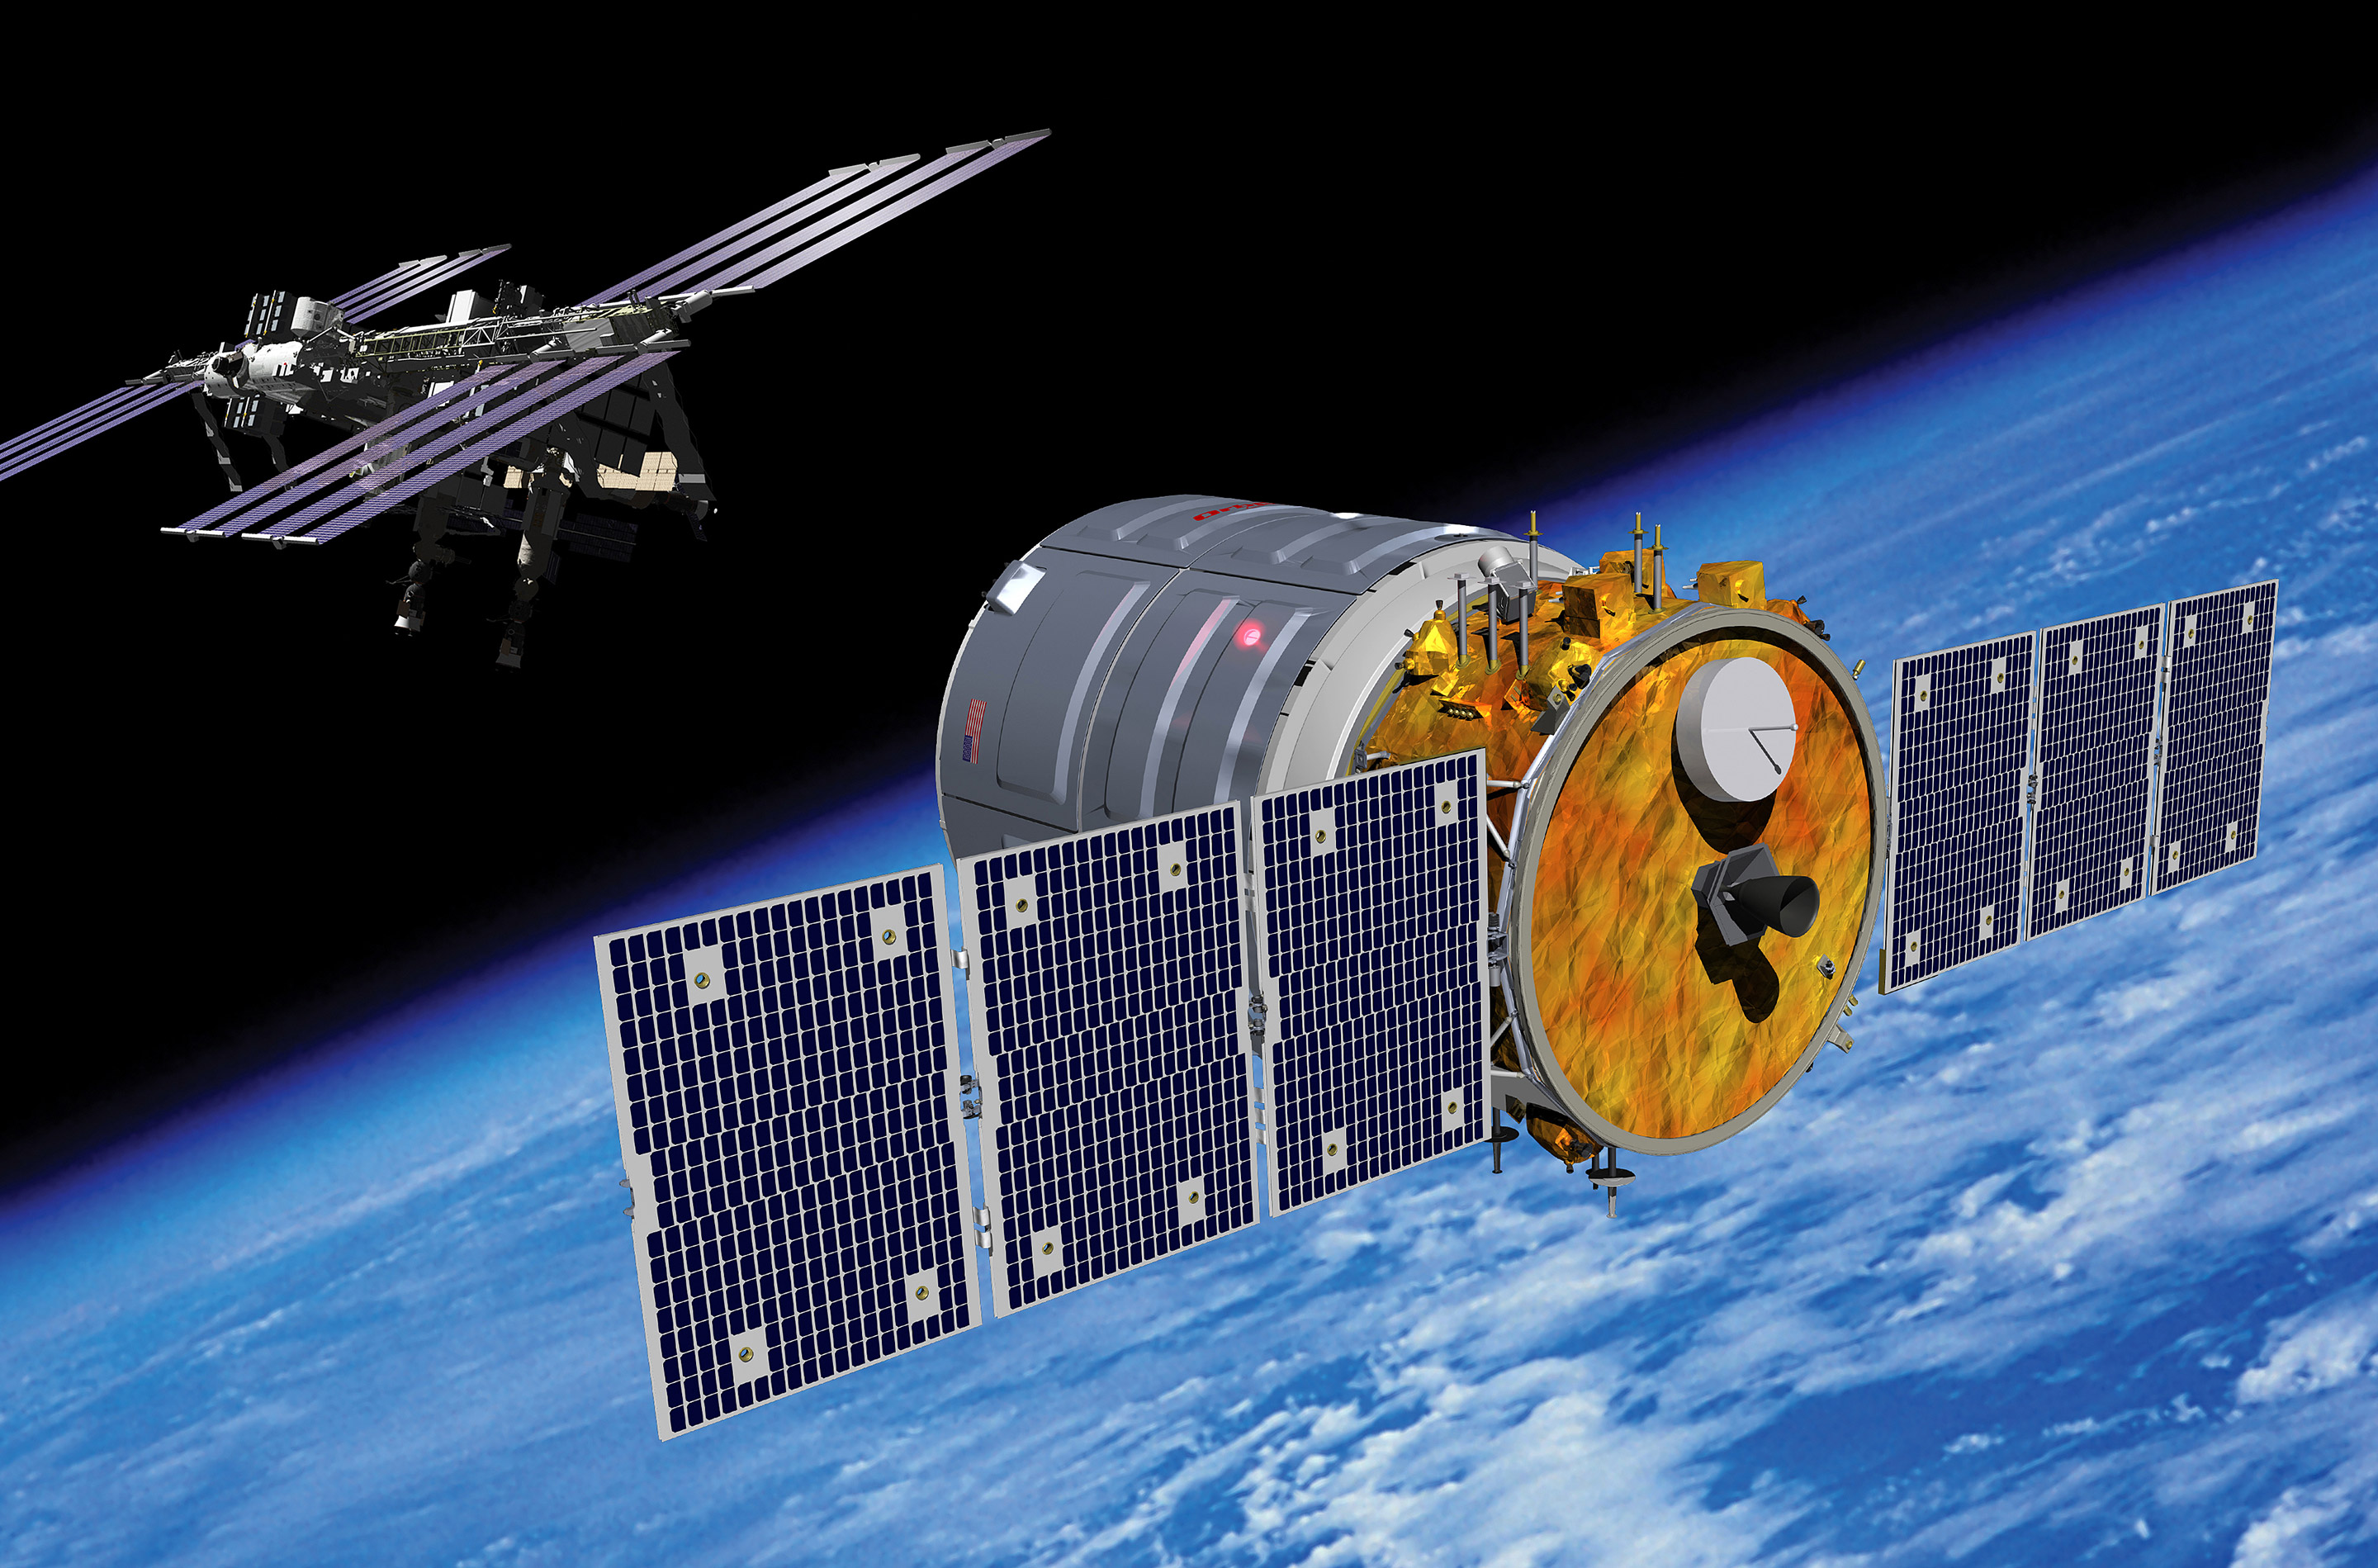 An artist rendering of the Cygnus spacecraft approaching the International Space Station. Credit: Orbital Sciences Corporation